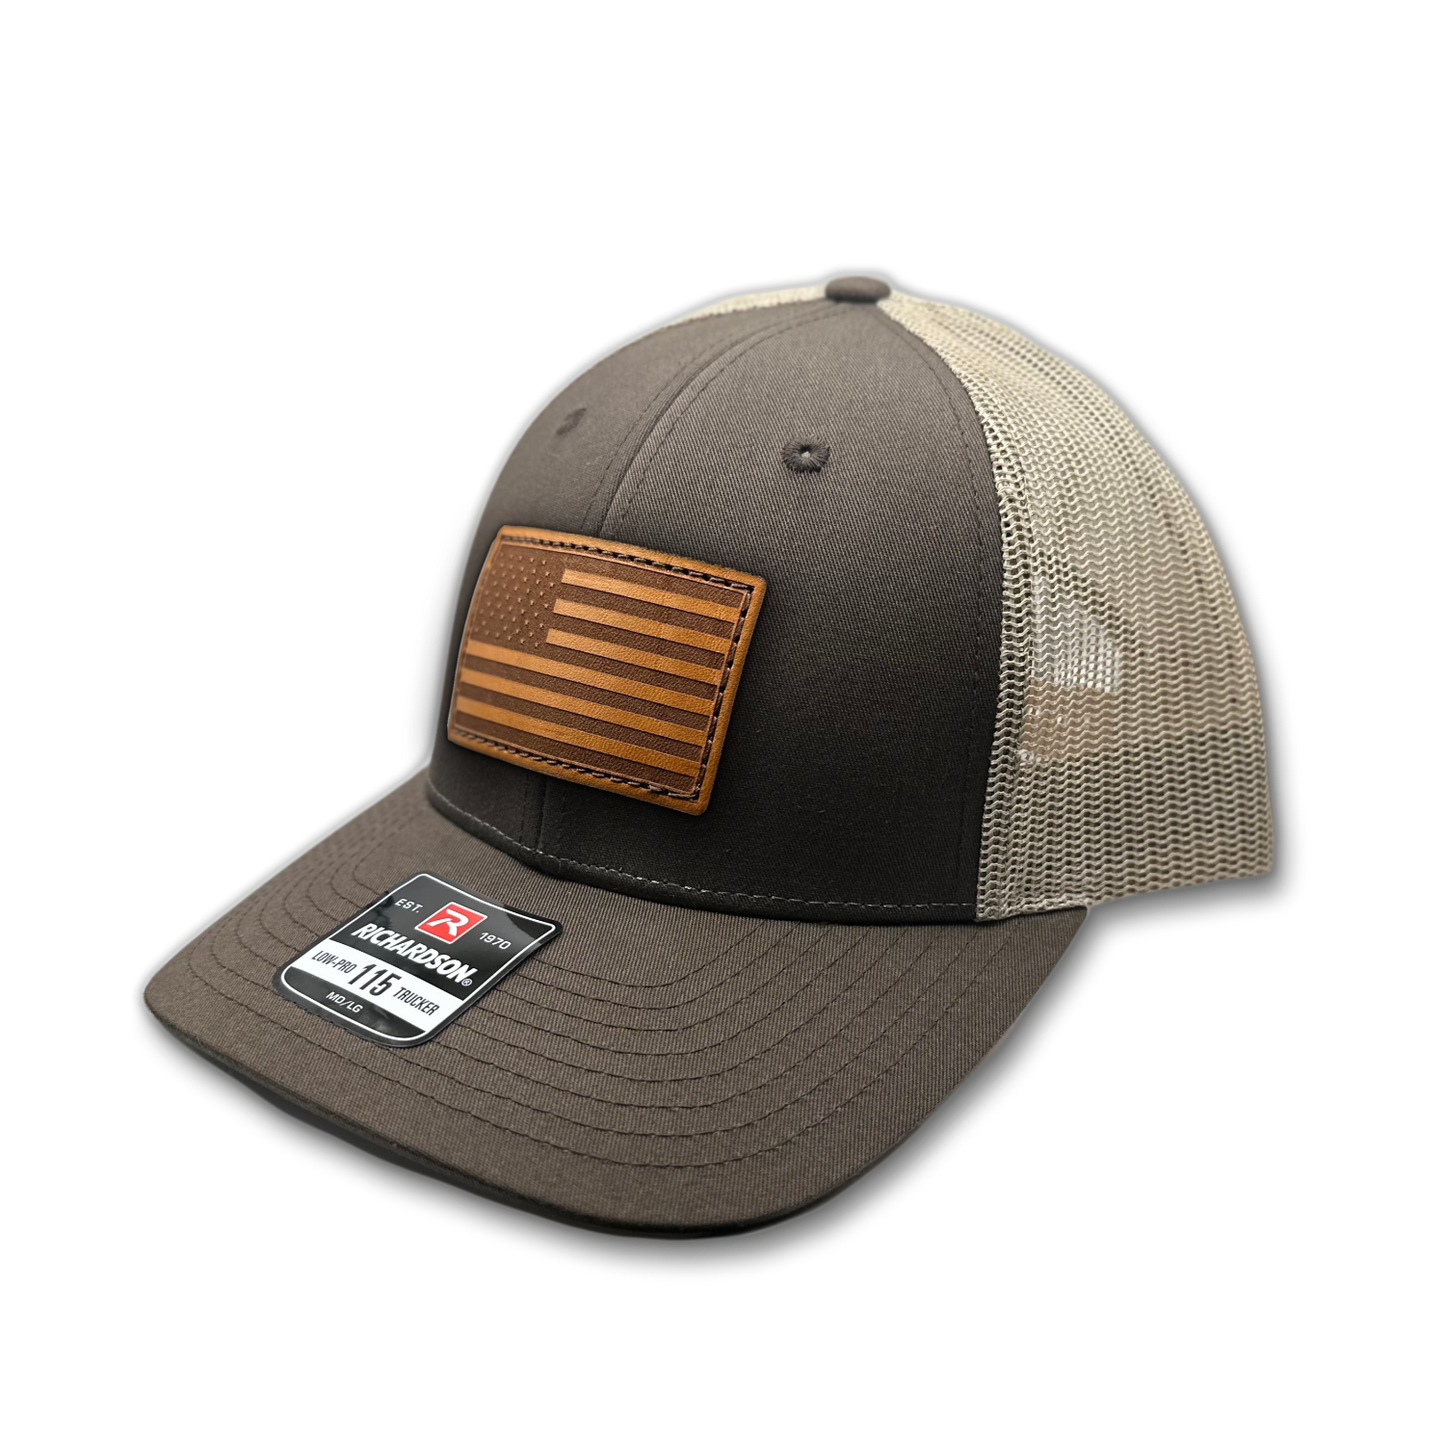 Image of a Brown/Khaki Richardson 115 hat with an American flag patch made of genuine leather, laser engraved and securely sewn onto the hat. The low profile trucker style hat is adjustable to fit small or M/L sizes, offering a versatile and fashionable accessory for any occasion."